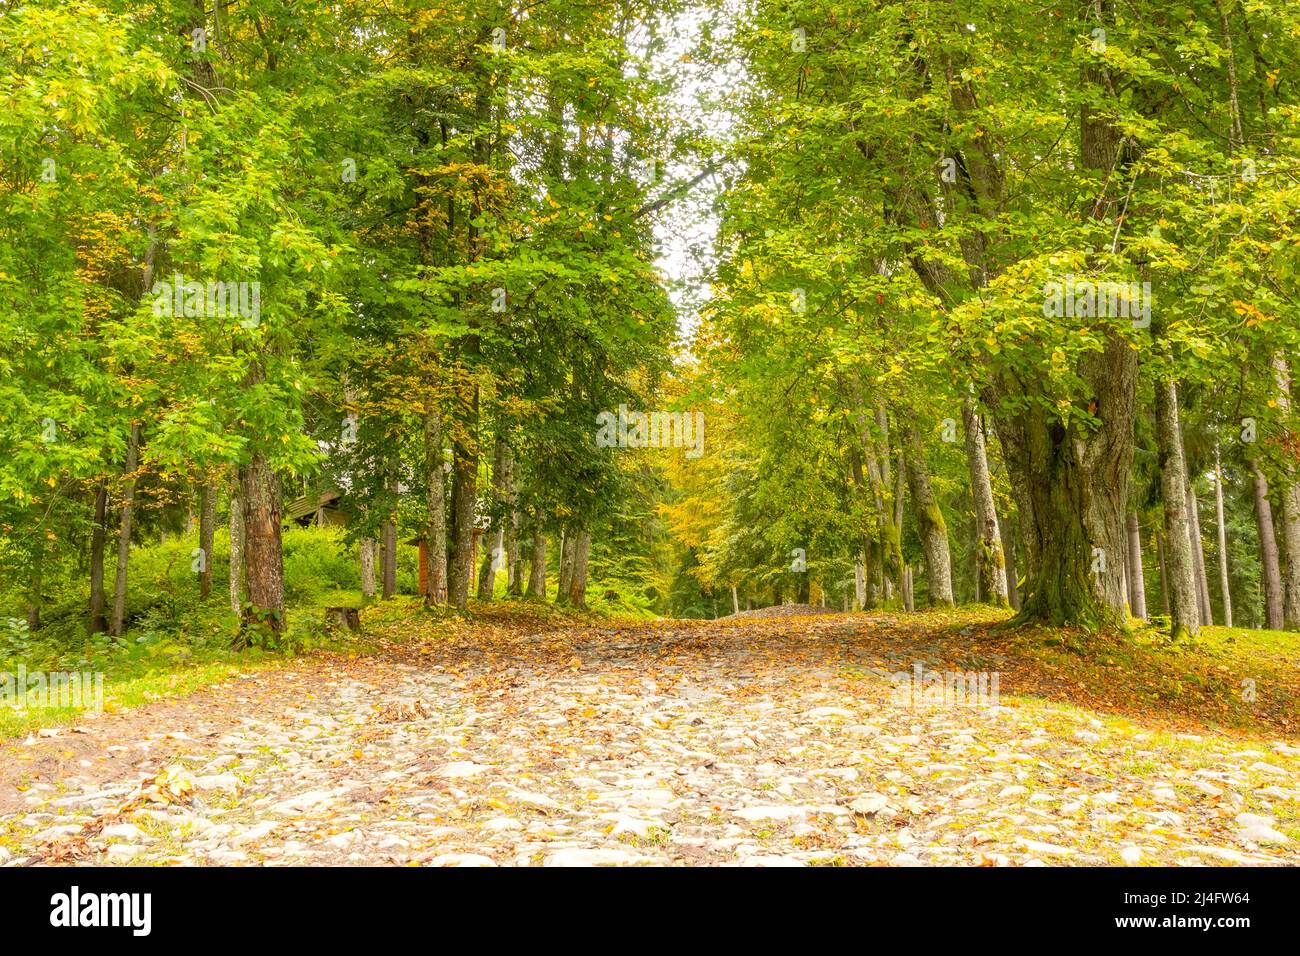 Quiet summer day in a leafy park. Old cobblestone road between trees Stock Photo